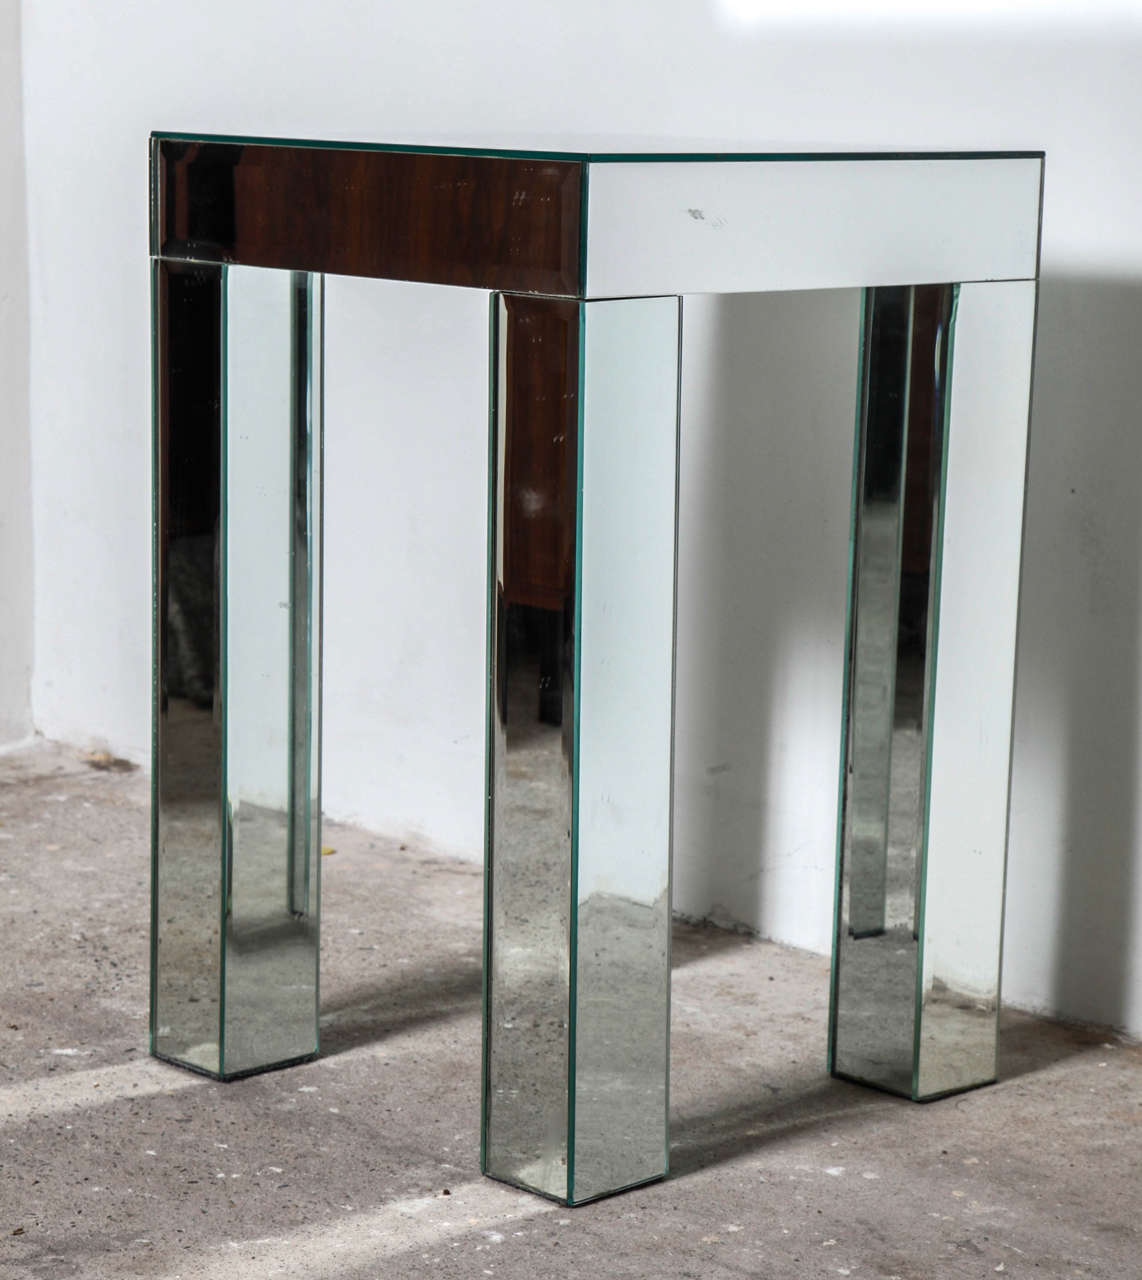 Pair of squared side tables of faceted mirrored glass. Crafted from hardwood solids and wood composite. Antiqued faceted mirror inlays on the top and all sides.